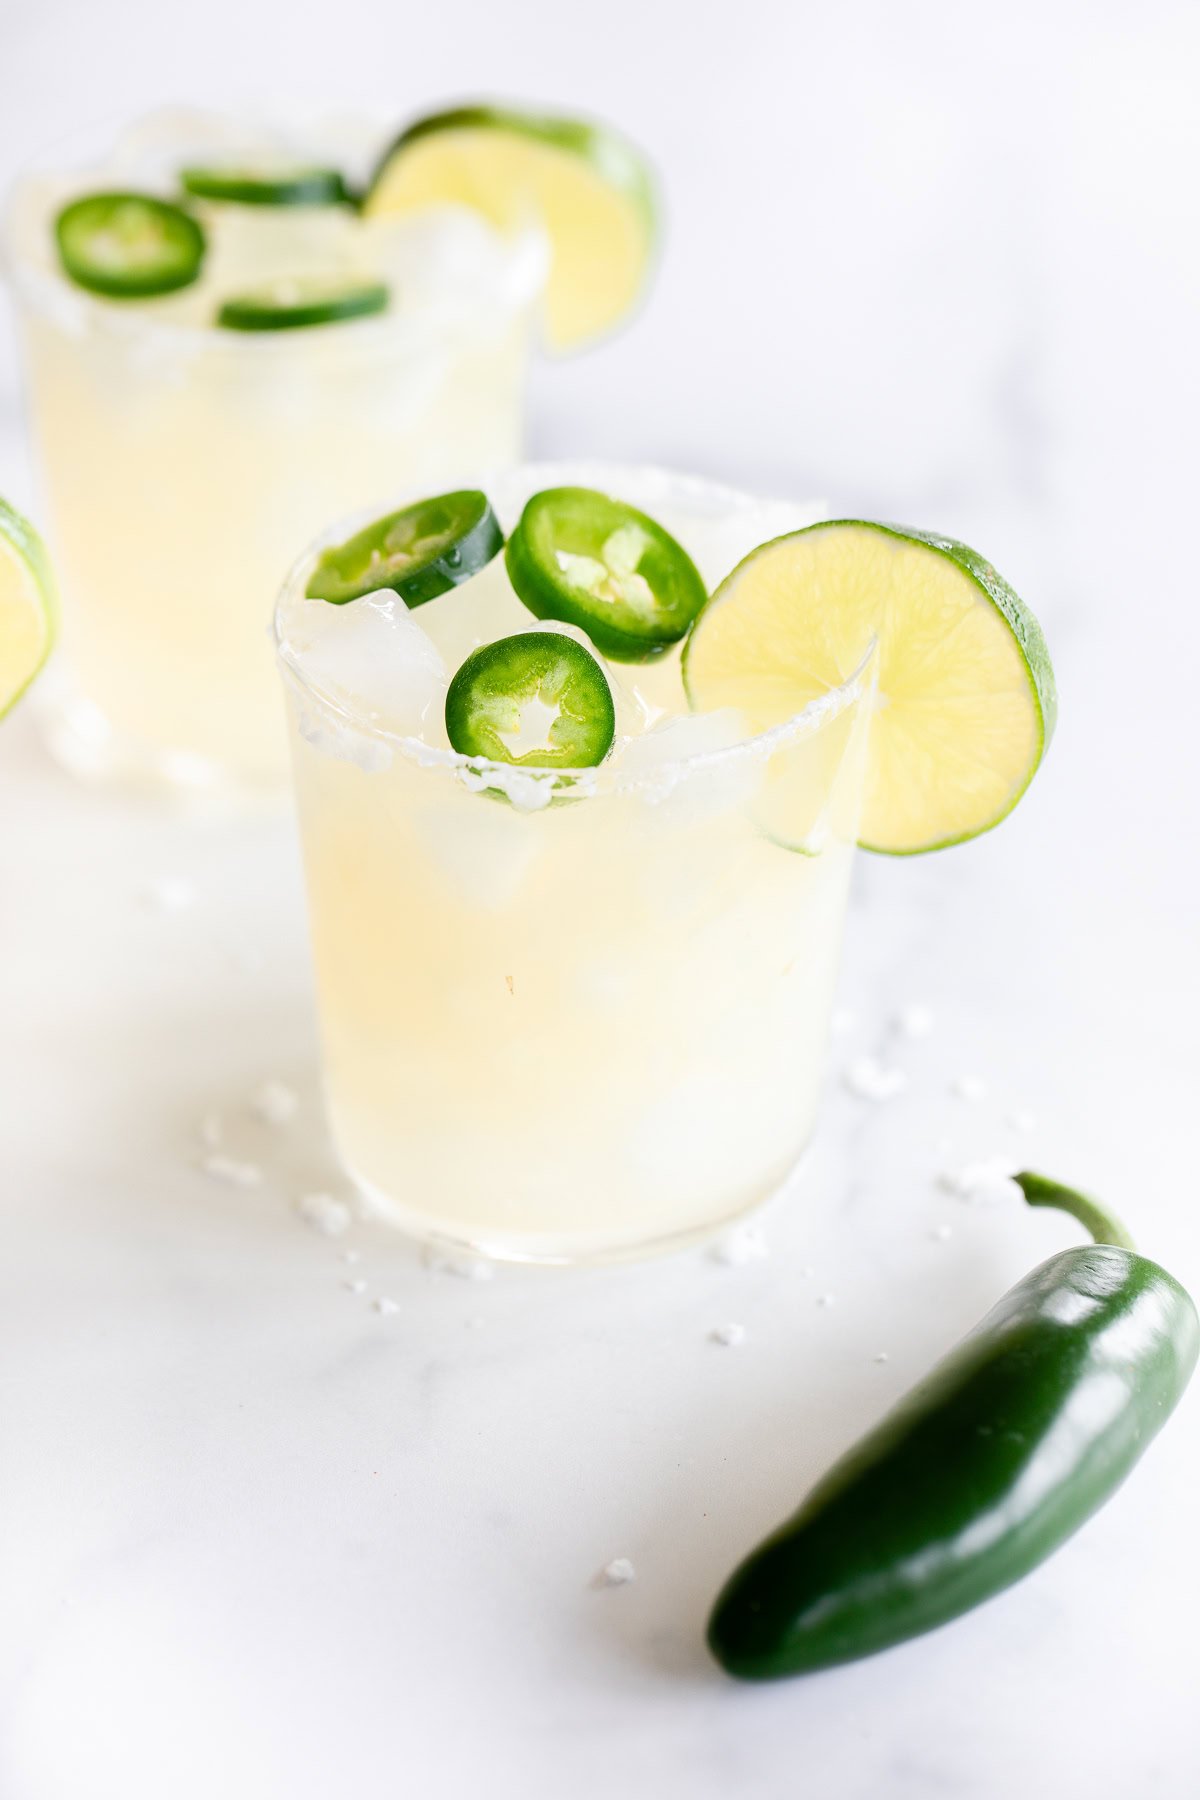 Two glasses of spicy margarita with jalapeño slices and lime garnish on a white surface, with extra jalapeño and scattered salt nearby.